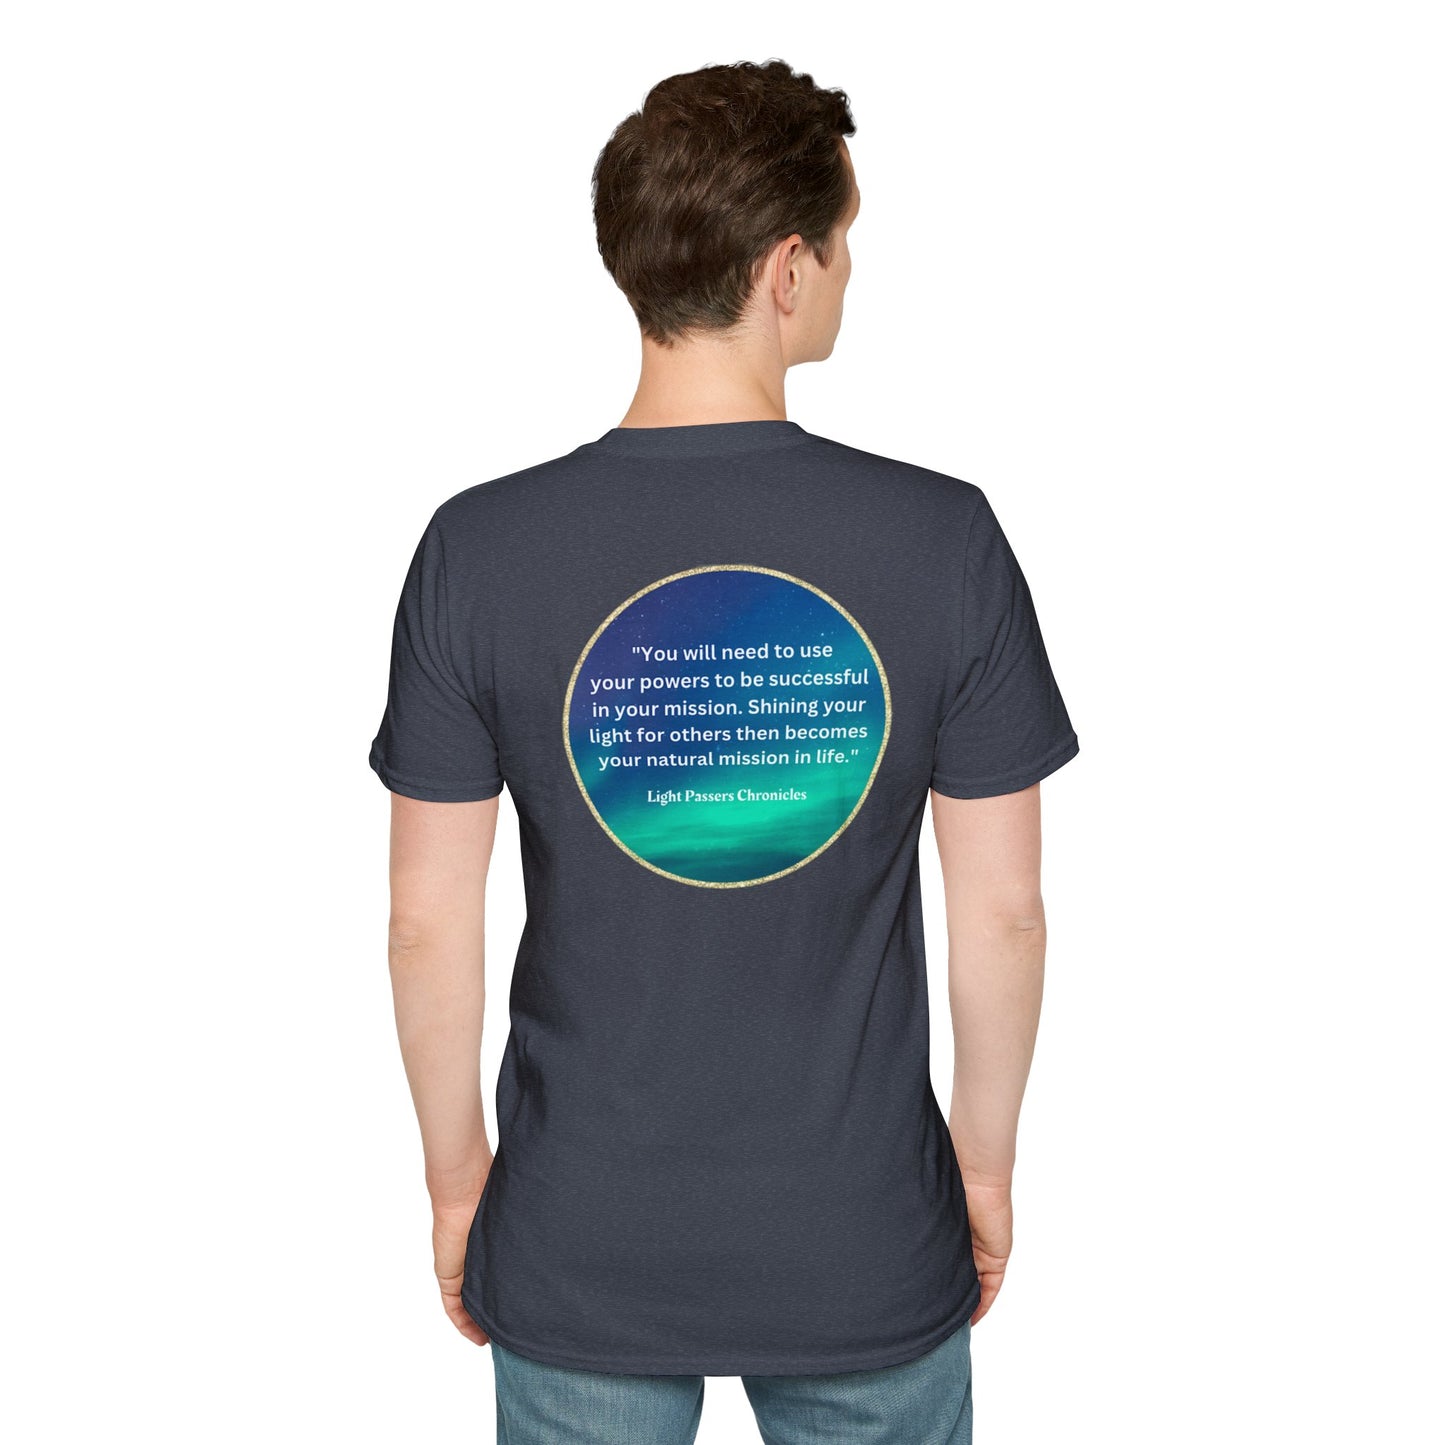 Light Passers Marketplace Use Your Powers to Inspire Change Unisex Soft T-shirt  Inspirational Messages, Mental Health